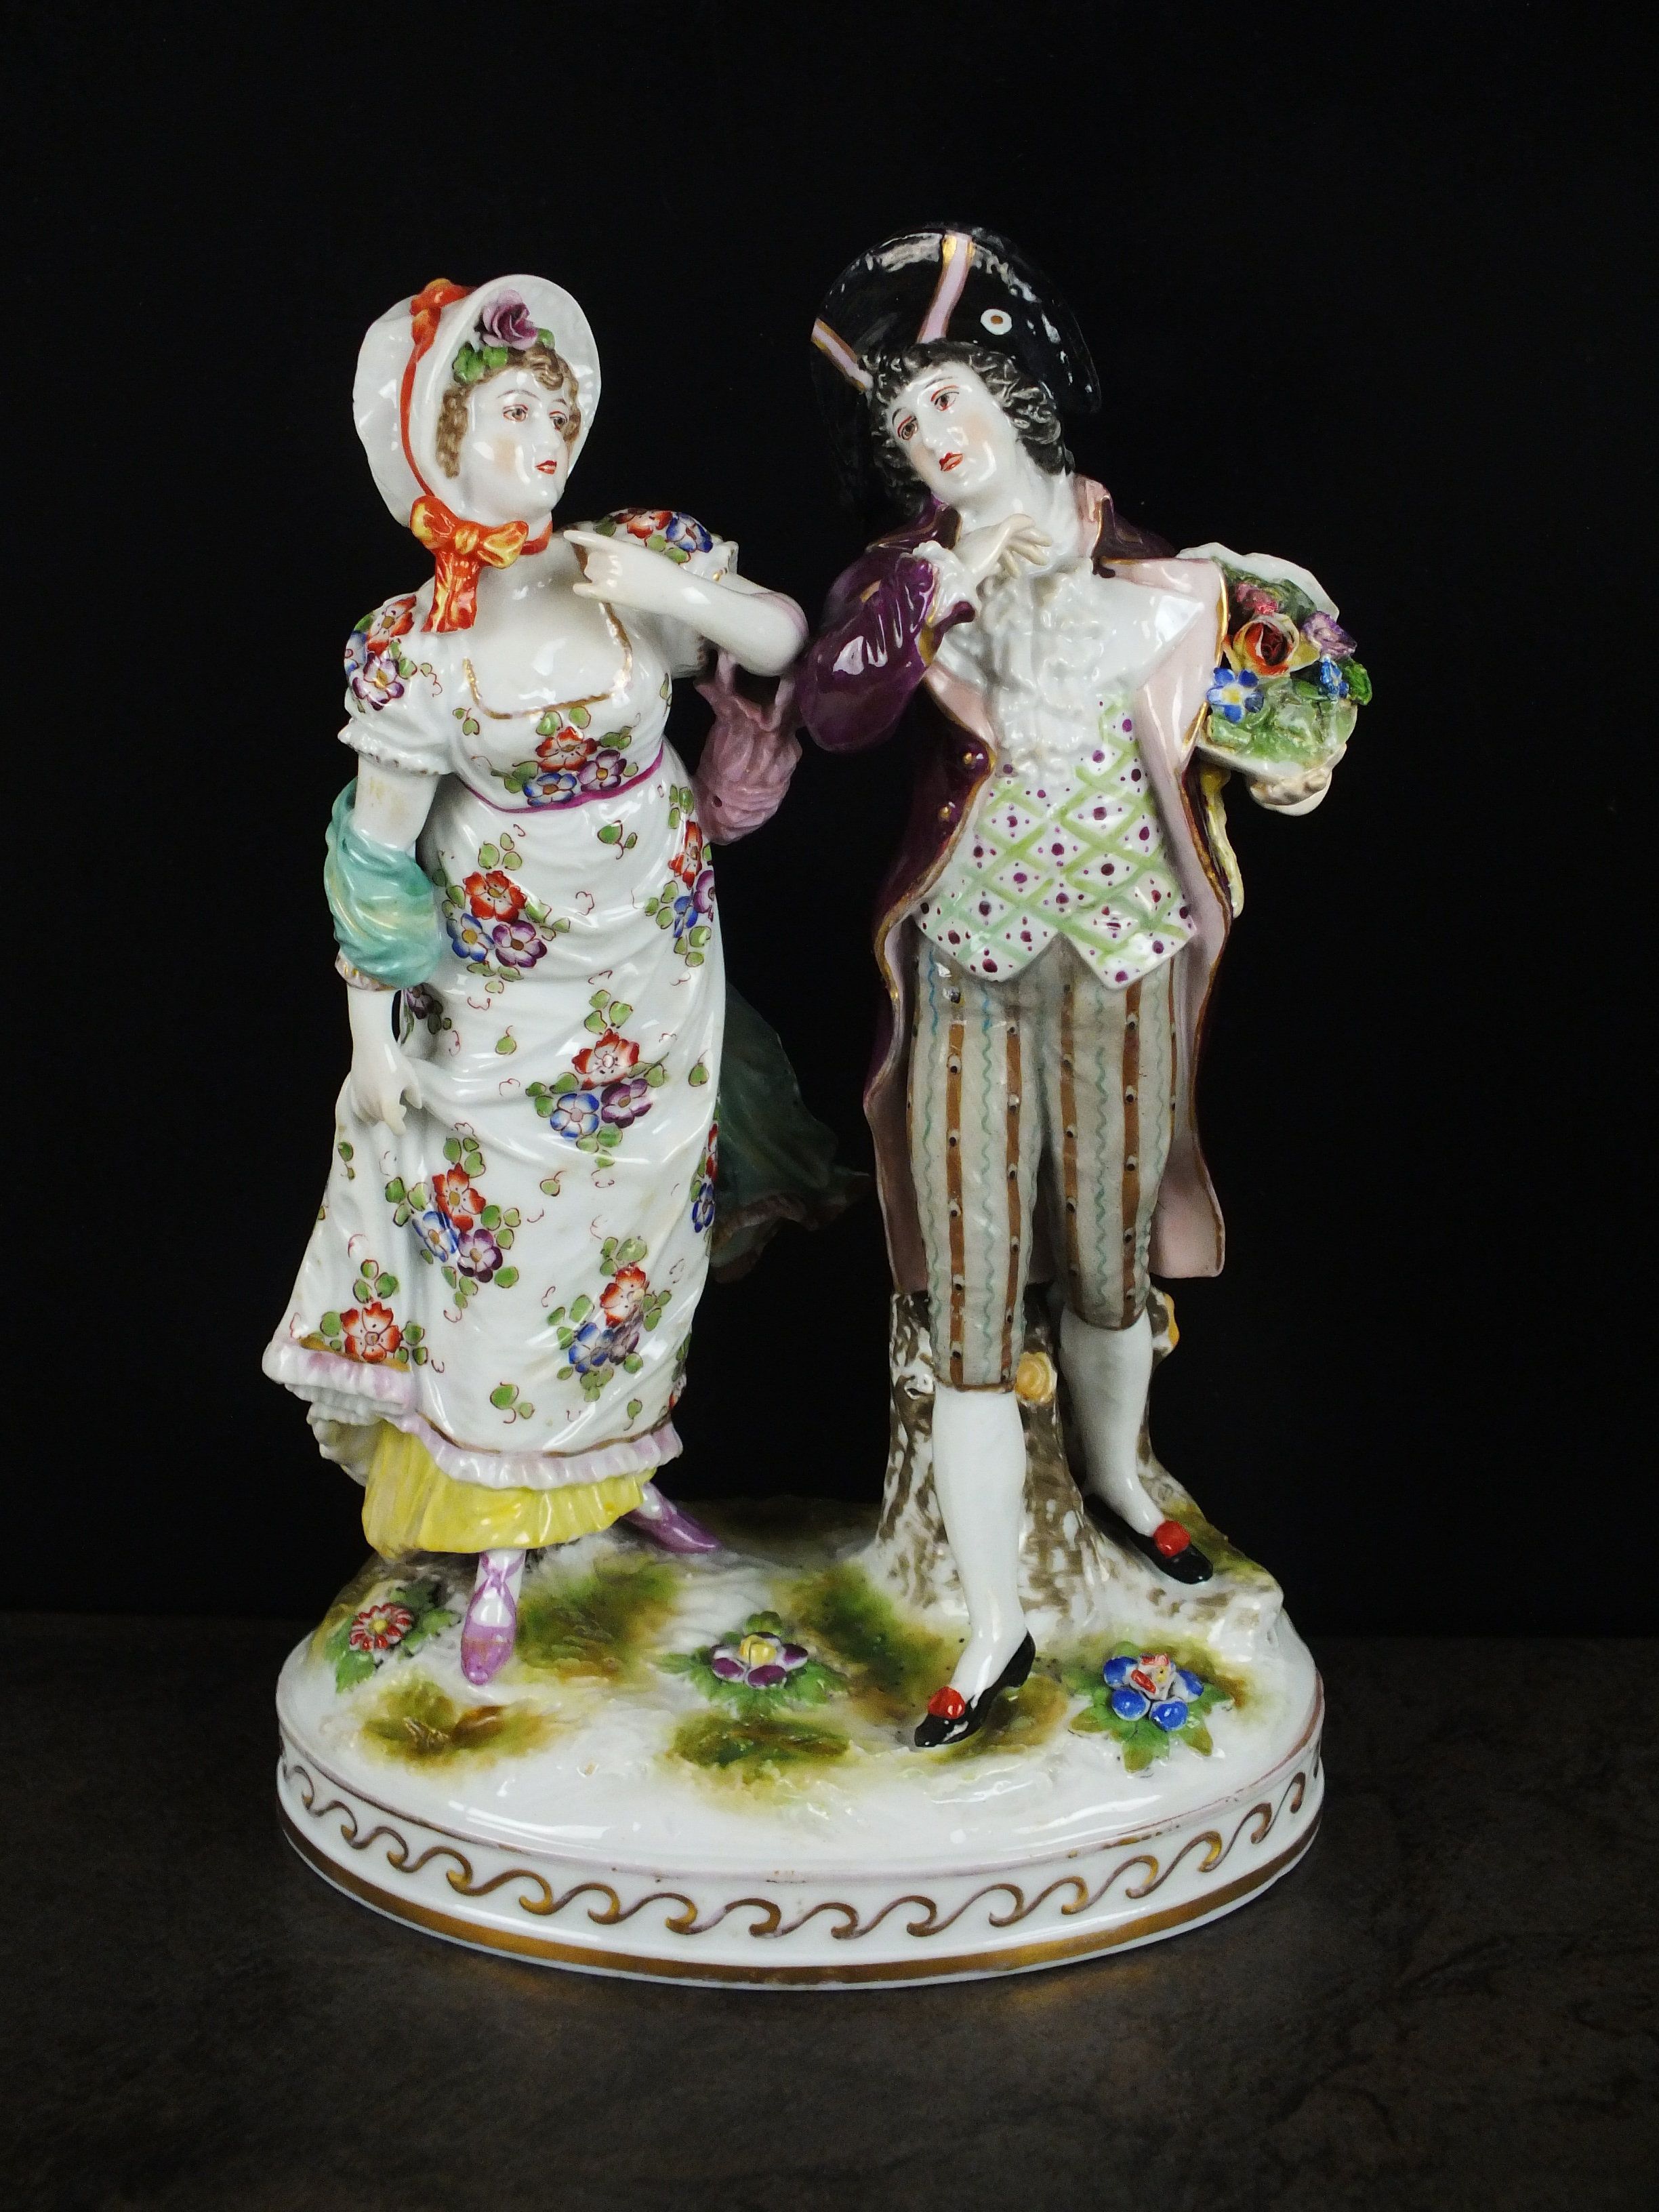 A Rudolstadt Volkstedt porcelain figural group, 20th century, modelled as gallant and companion, on